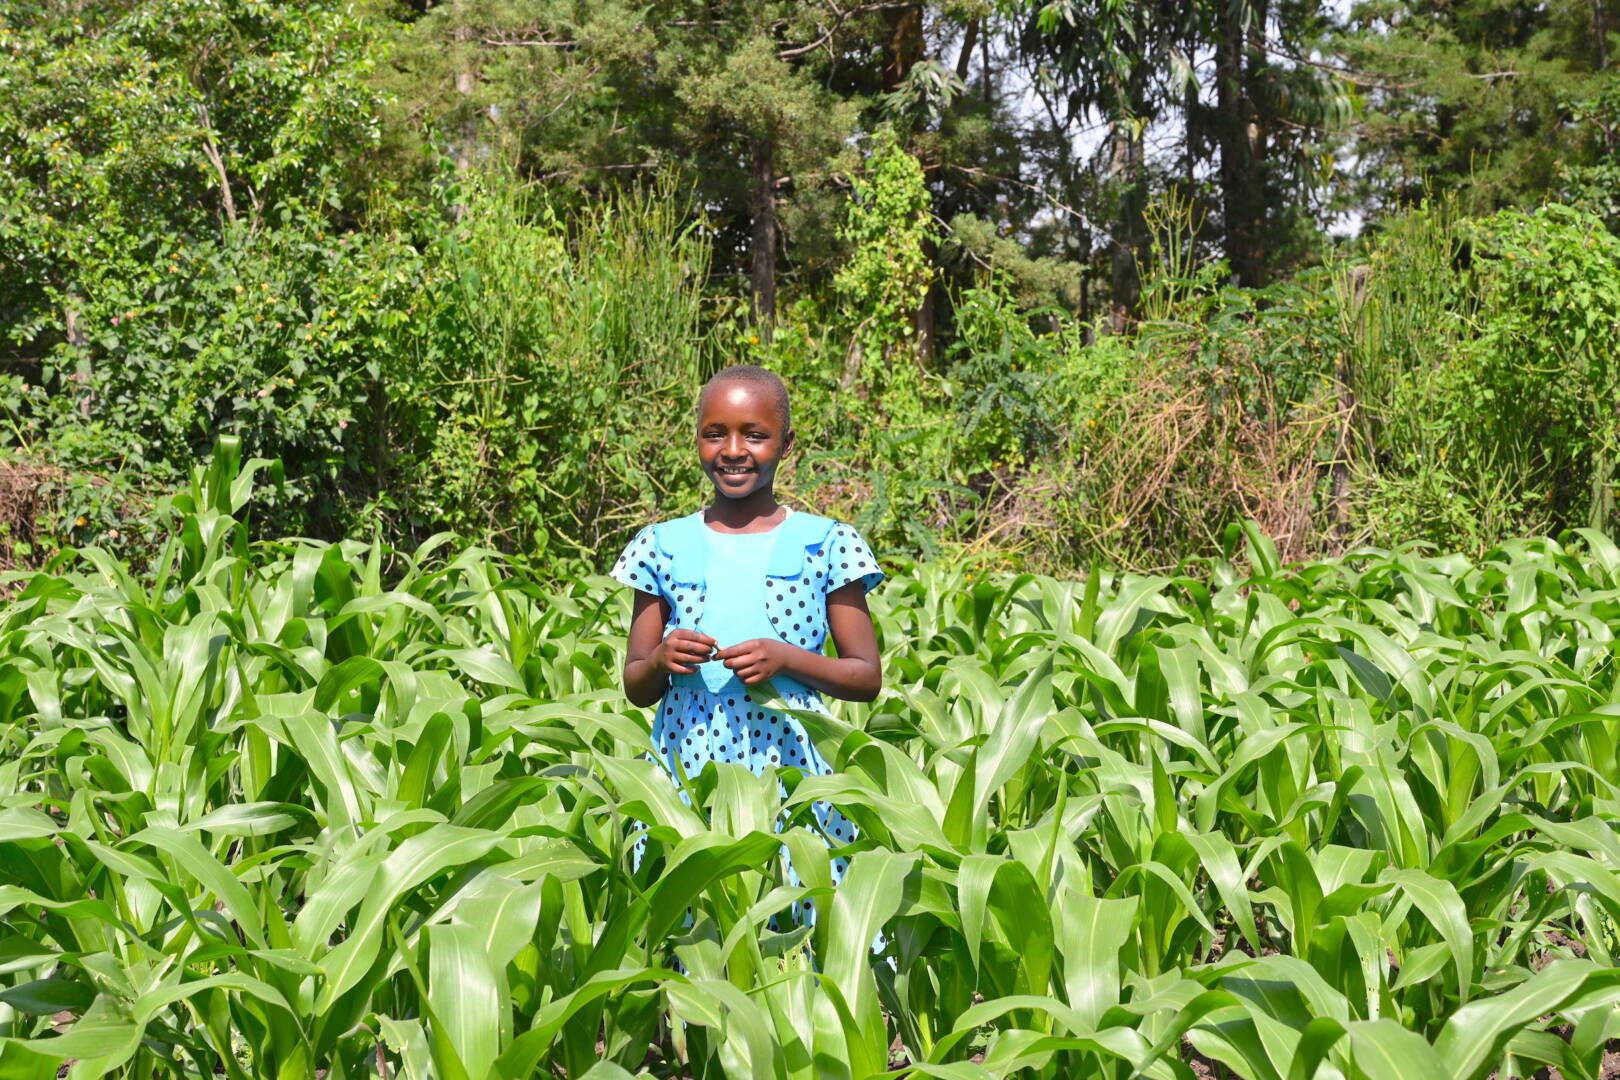 A smiling girl stands in the middle of a field of corn that comes up to her waist.